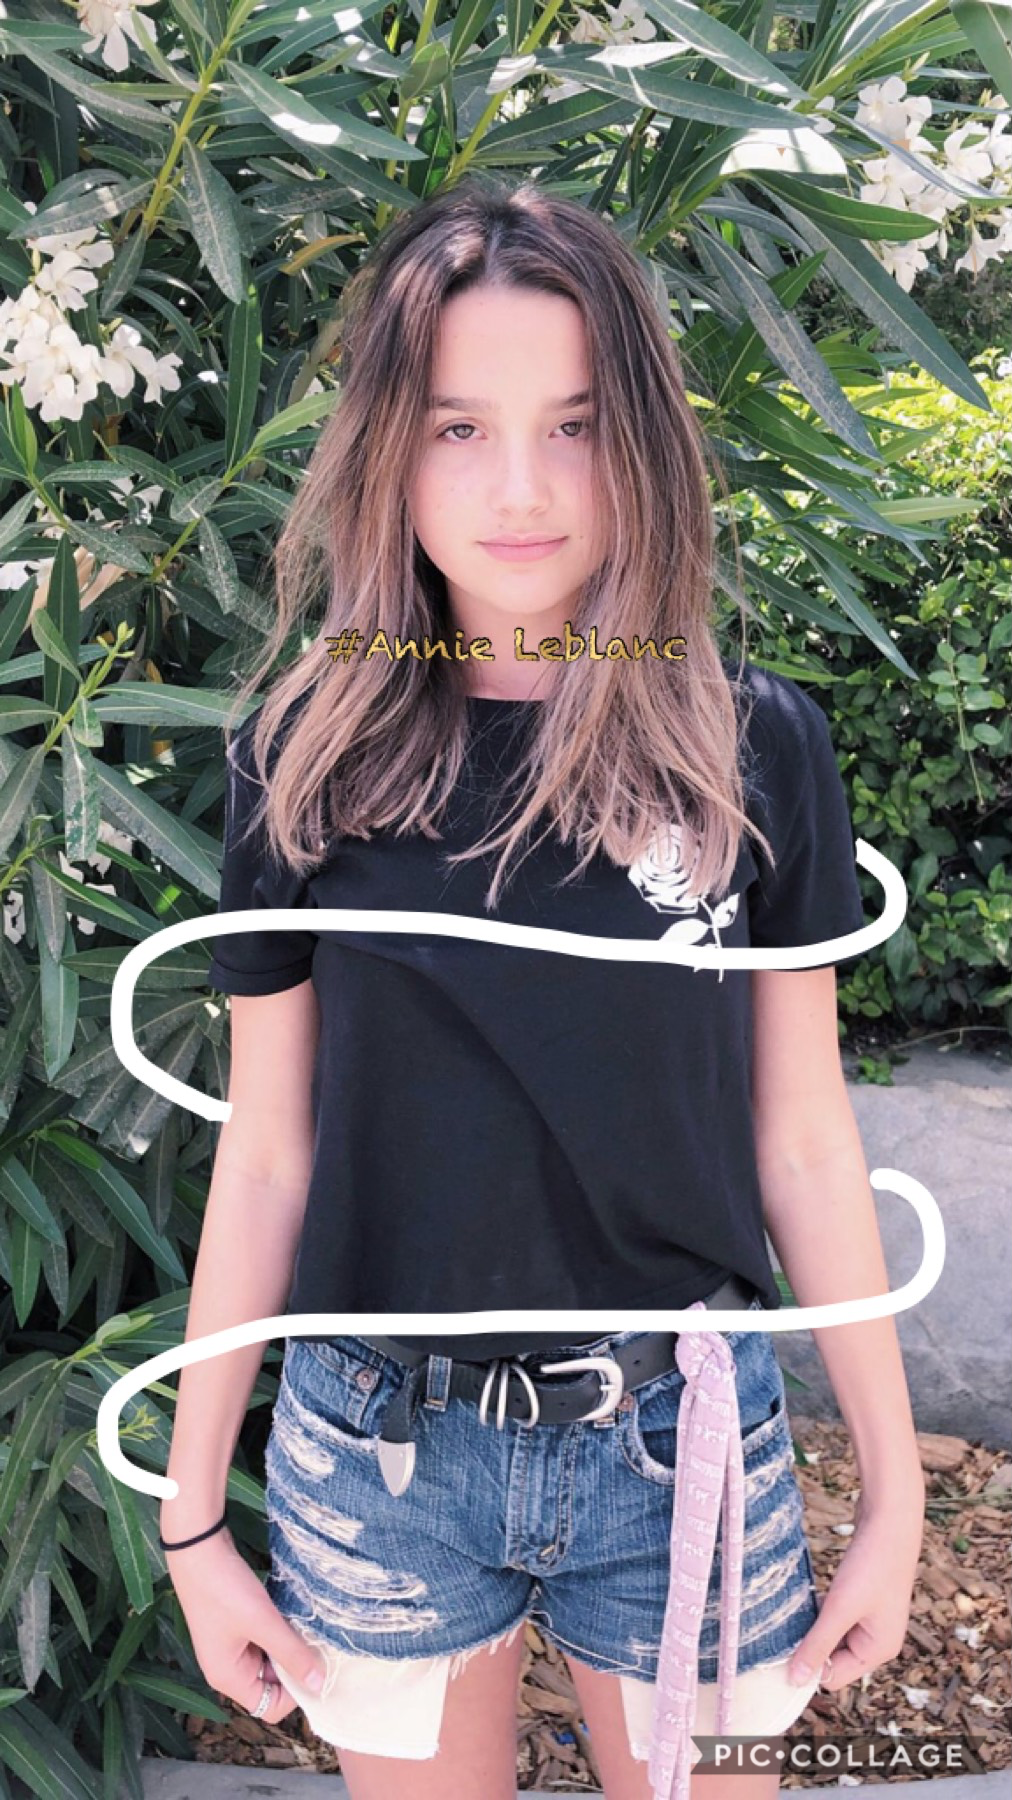 Who’s an Annie Leblanc fan??!?!?!?! I know I am!! Love her so much! Go check out her YouTube channel